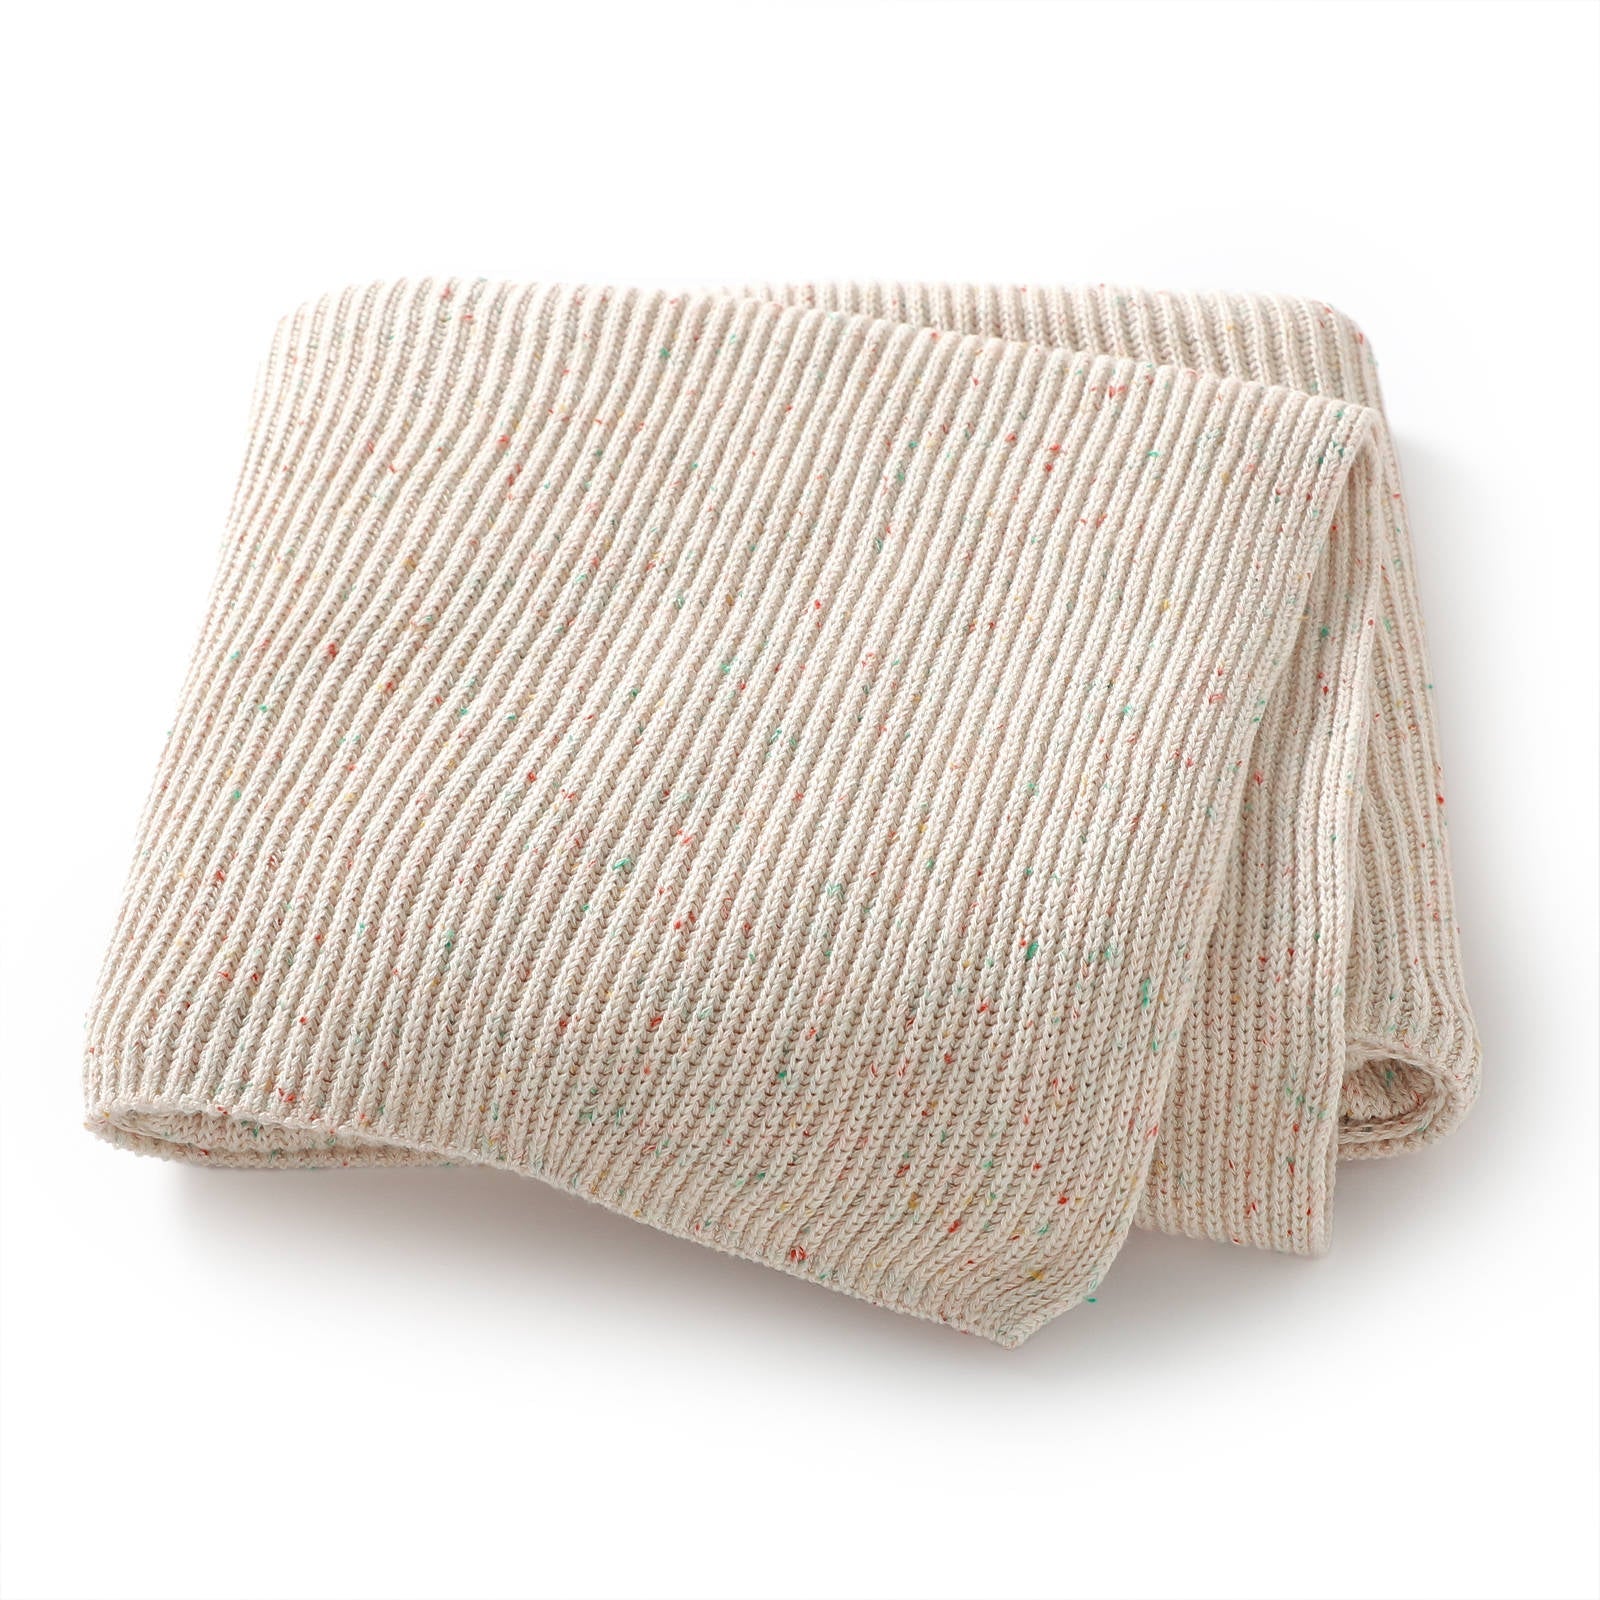 Ribbed Confetti Newborn Blanket Set - Baby Blankets at Louie Meets Lola